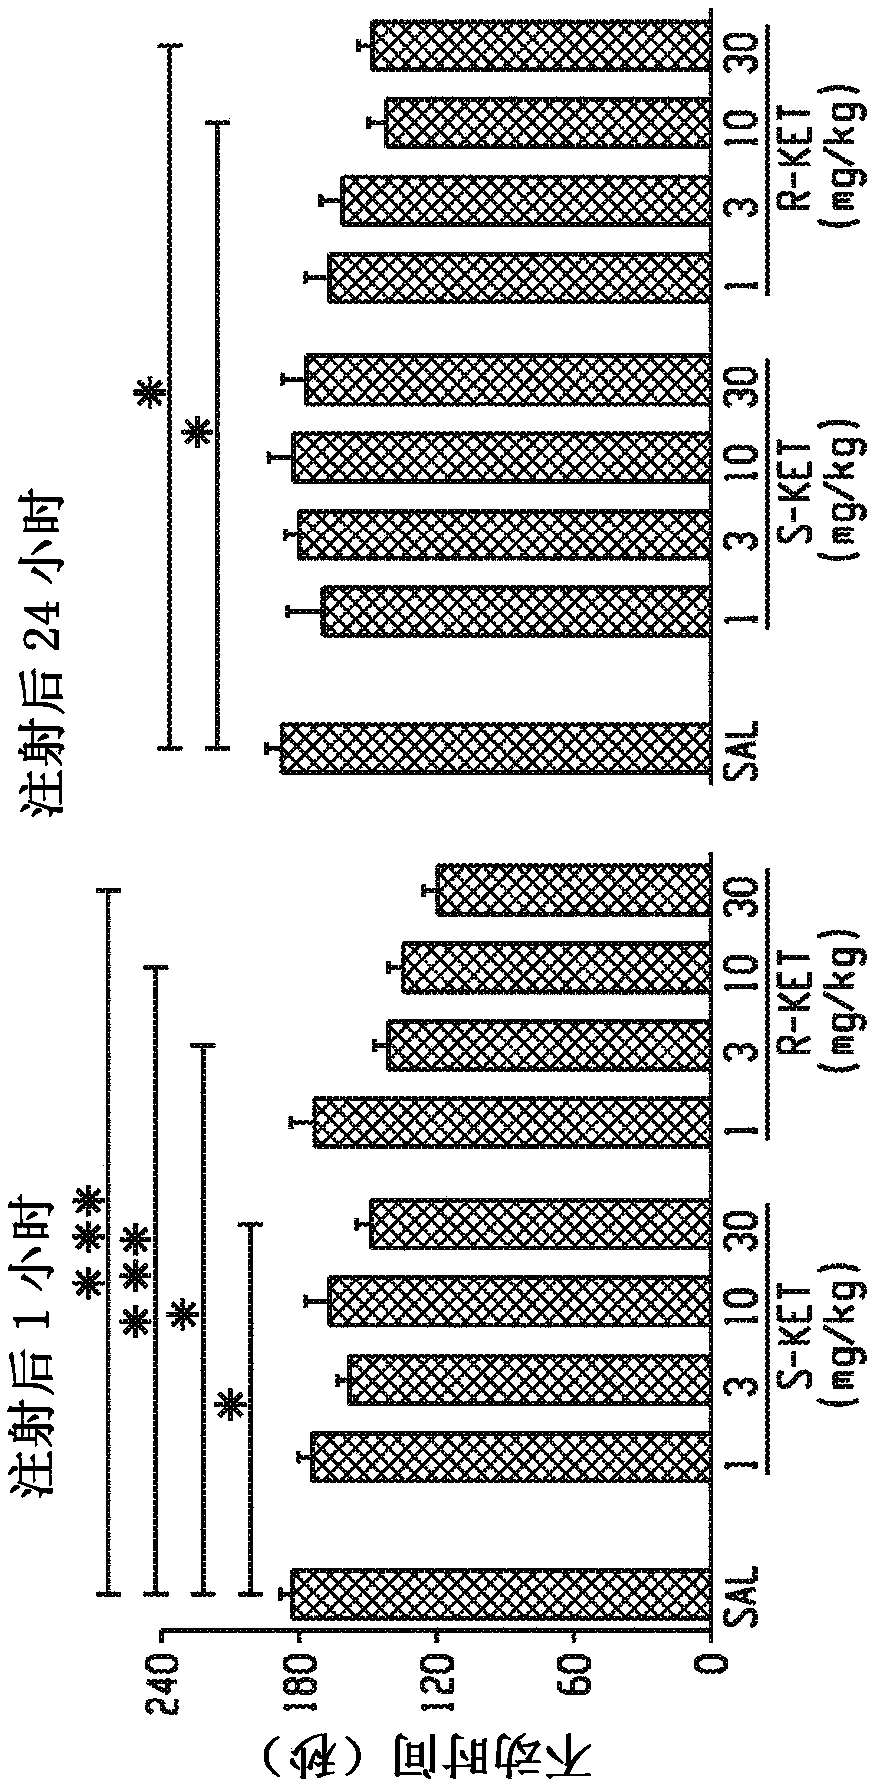 Methods of using (2r, 6r)-hydroxynorketamine and (2s, 6s)-hydroxynorketamine in treatment of depression, anxiety, anhedonia, suicidal ideation, and post traumatic stress disorders